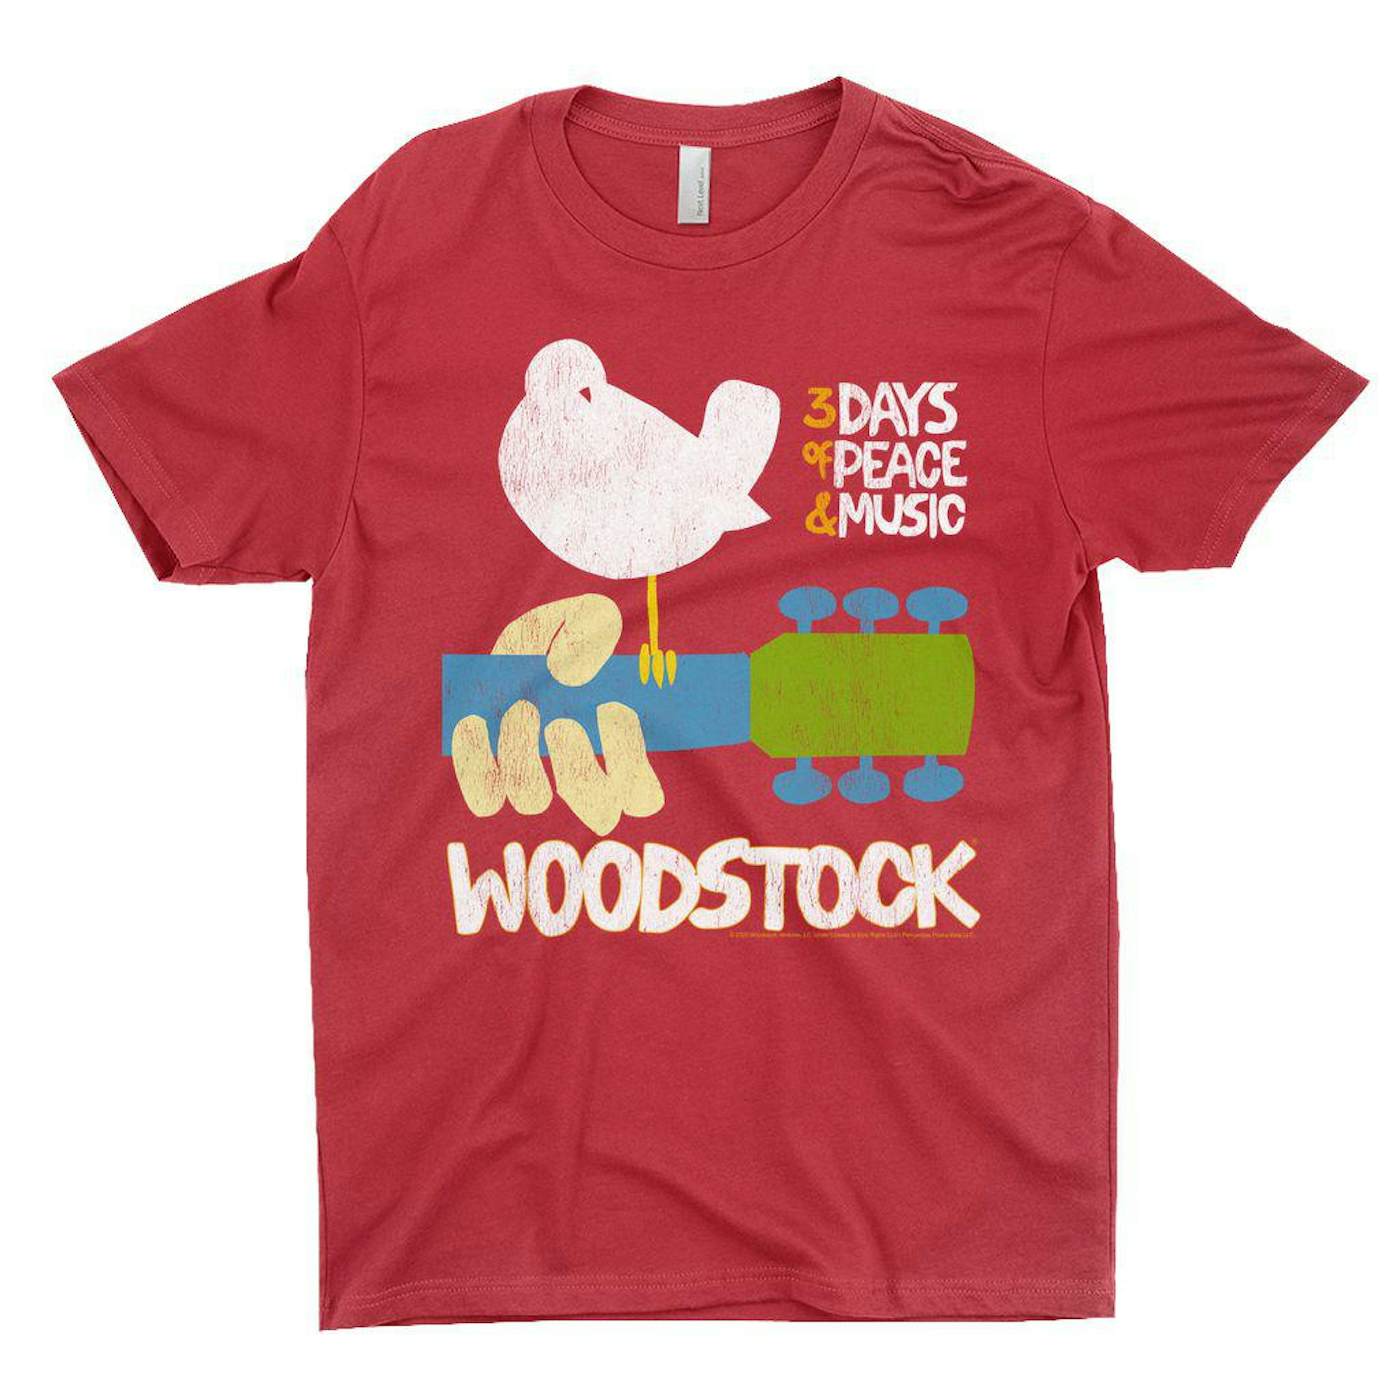 Woodstock T-Shirt | 3 Days Of Peace And Music Woodstock Shirt